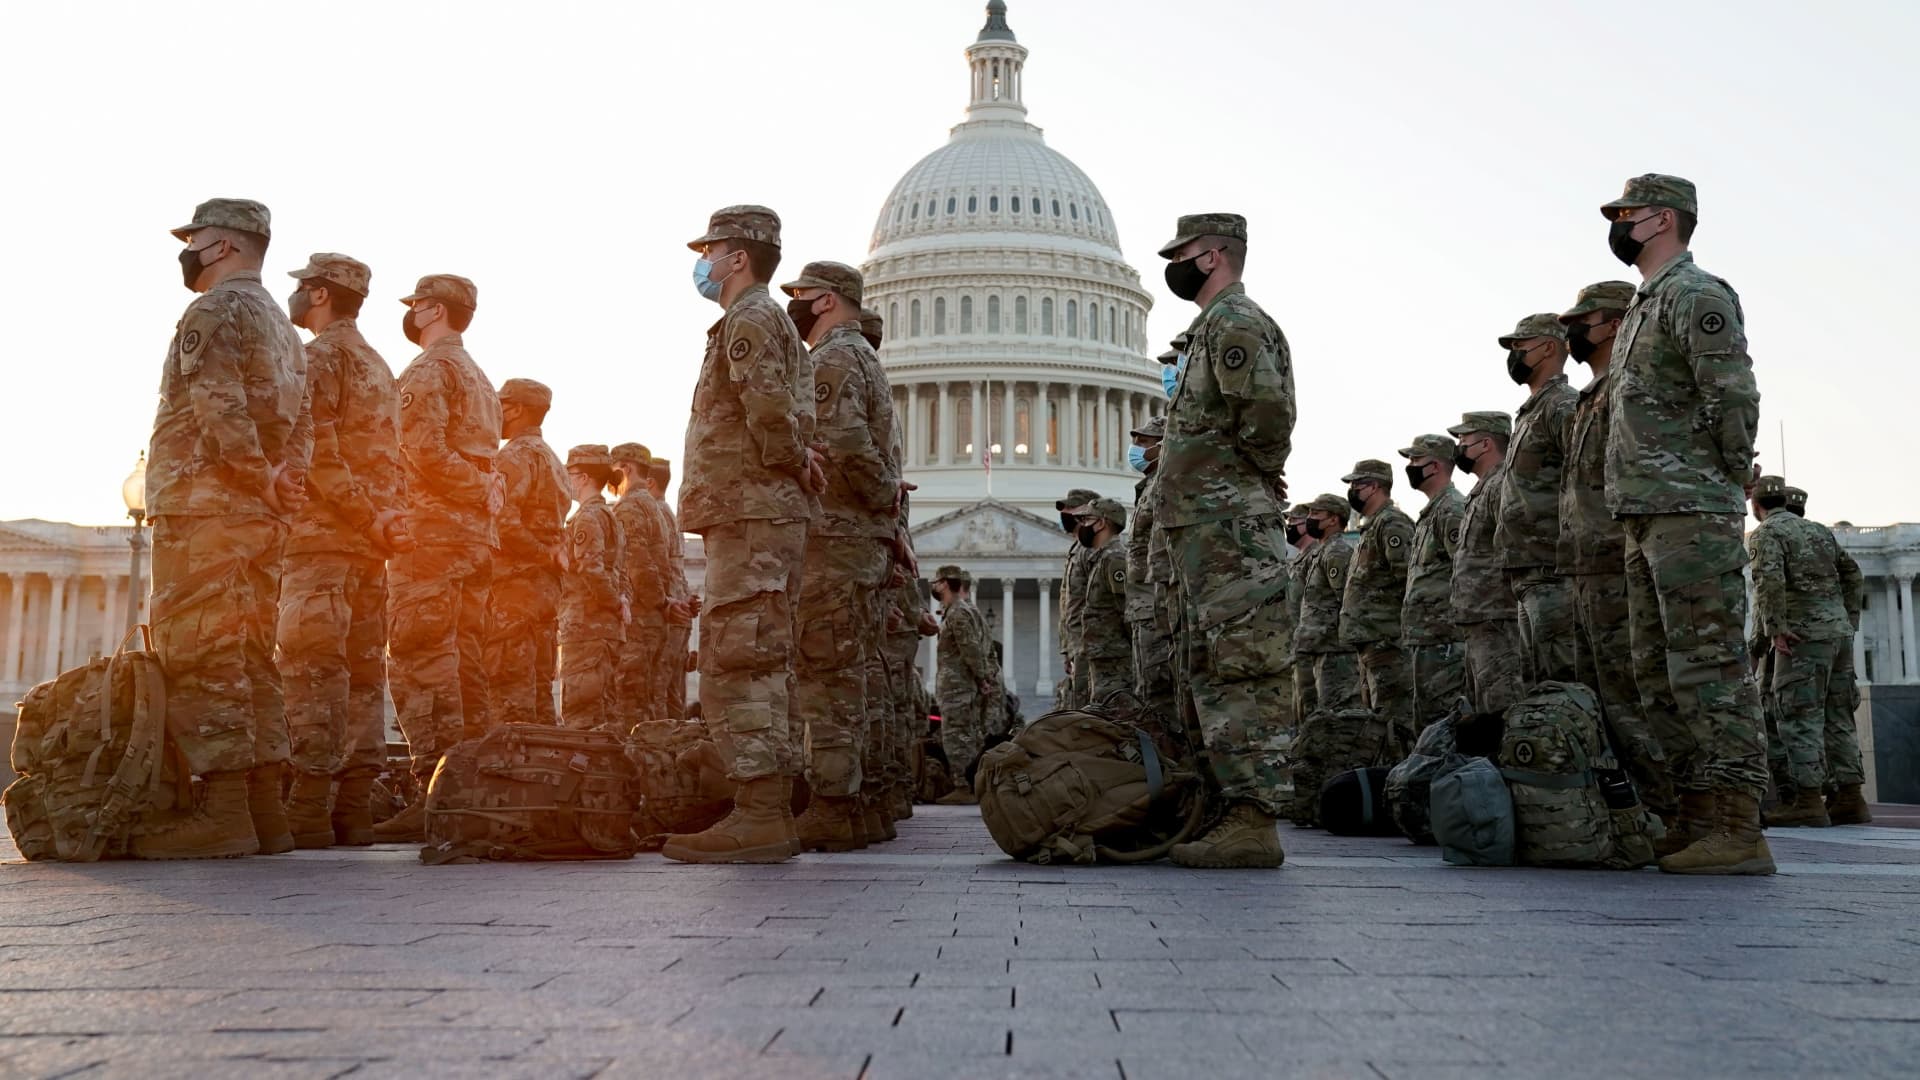 Members of the National Guard gather at the U.S. Capitol as the House of Representatives prepares to begin the voting process on a resolution demanding U.S. Vice President Pence and the cabinet remove President Trump from office, in Washington, January 12, 2021.